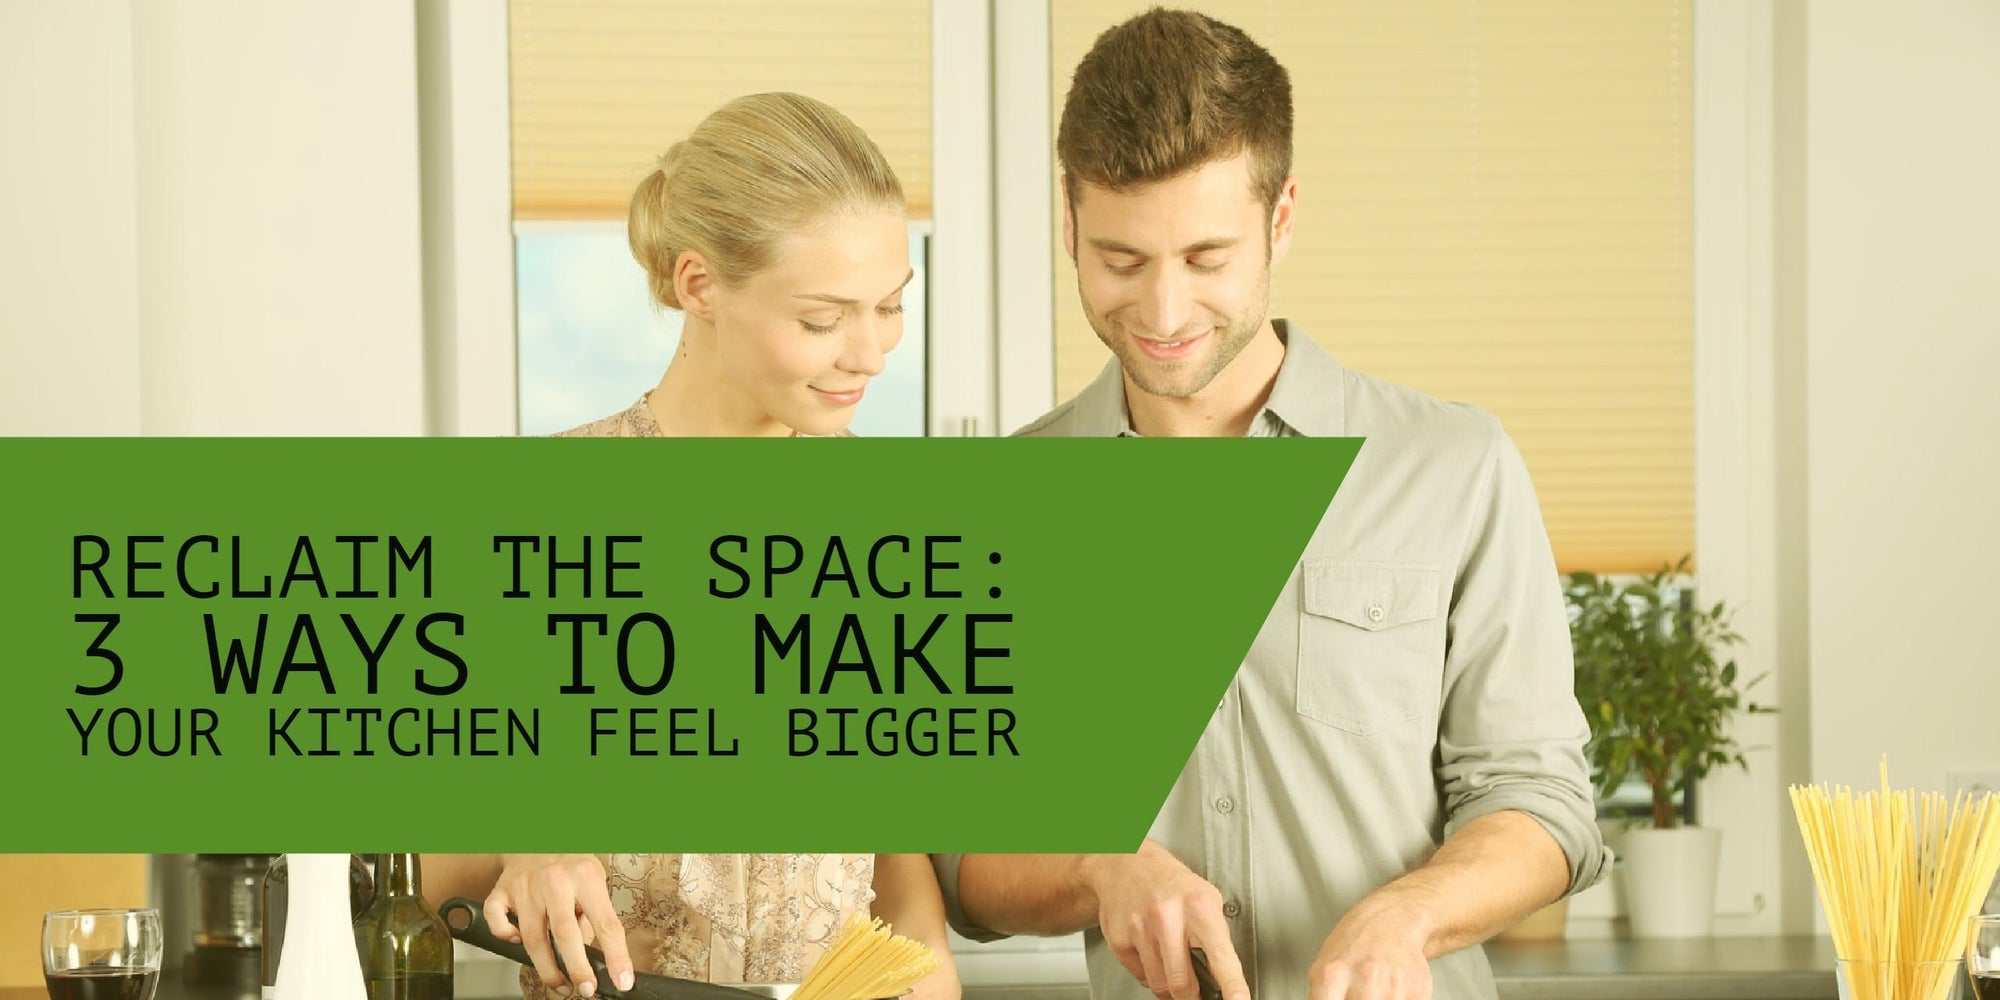 How-To Reclaim Space: 3 Ways to Make Your Kitchen Feel Bigger